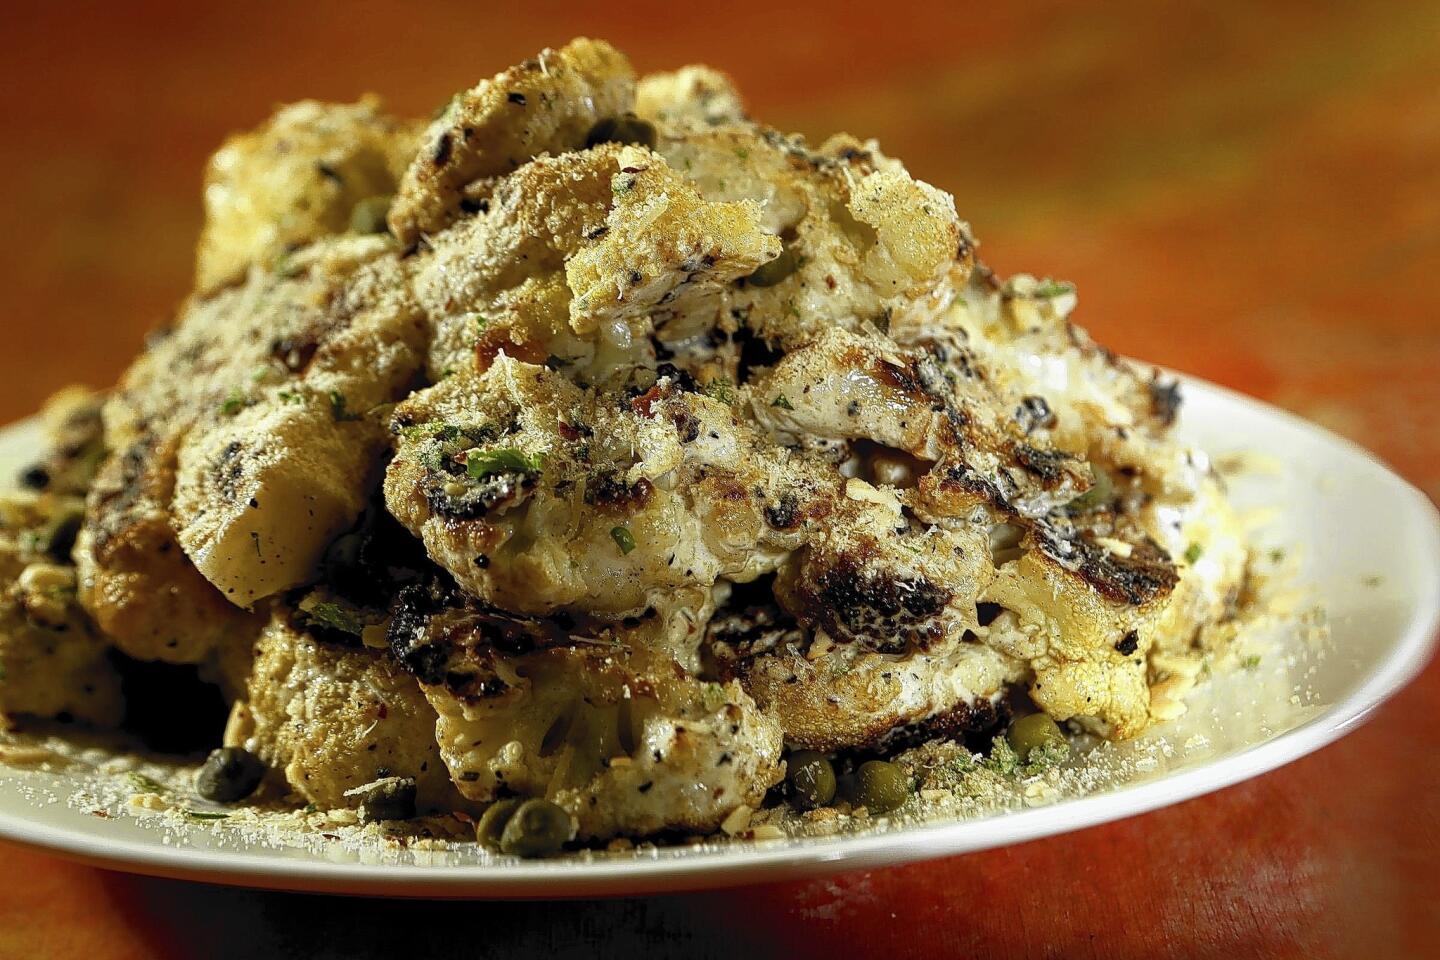 The Wallace's grilled cauliflower